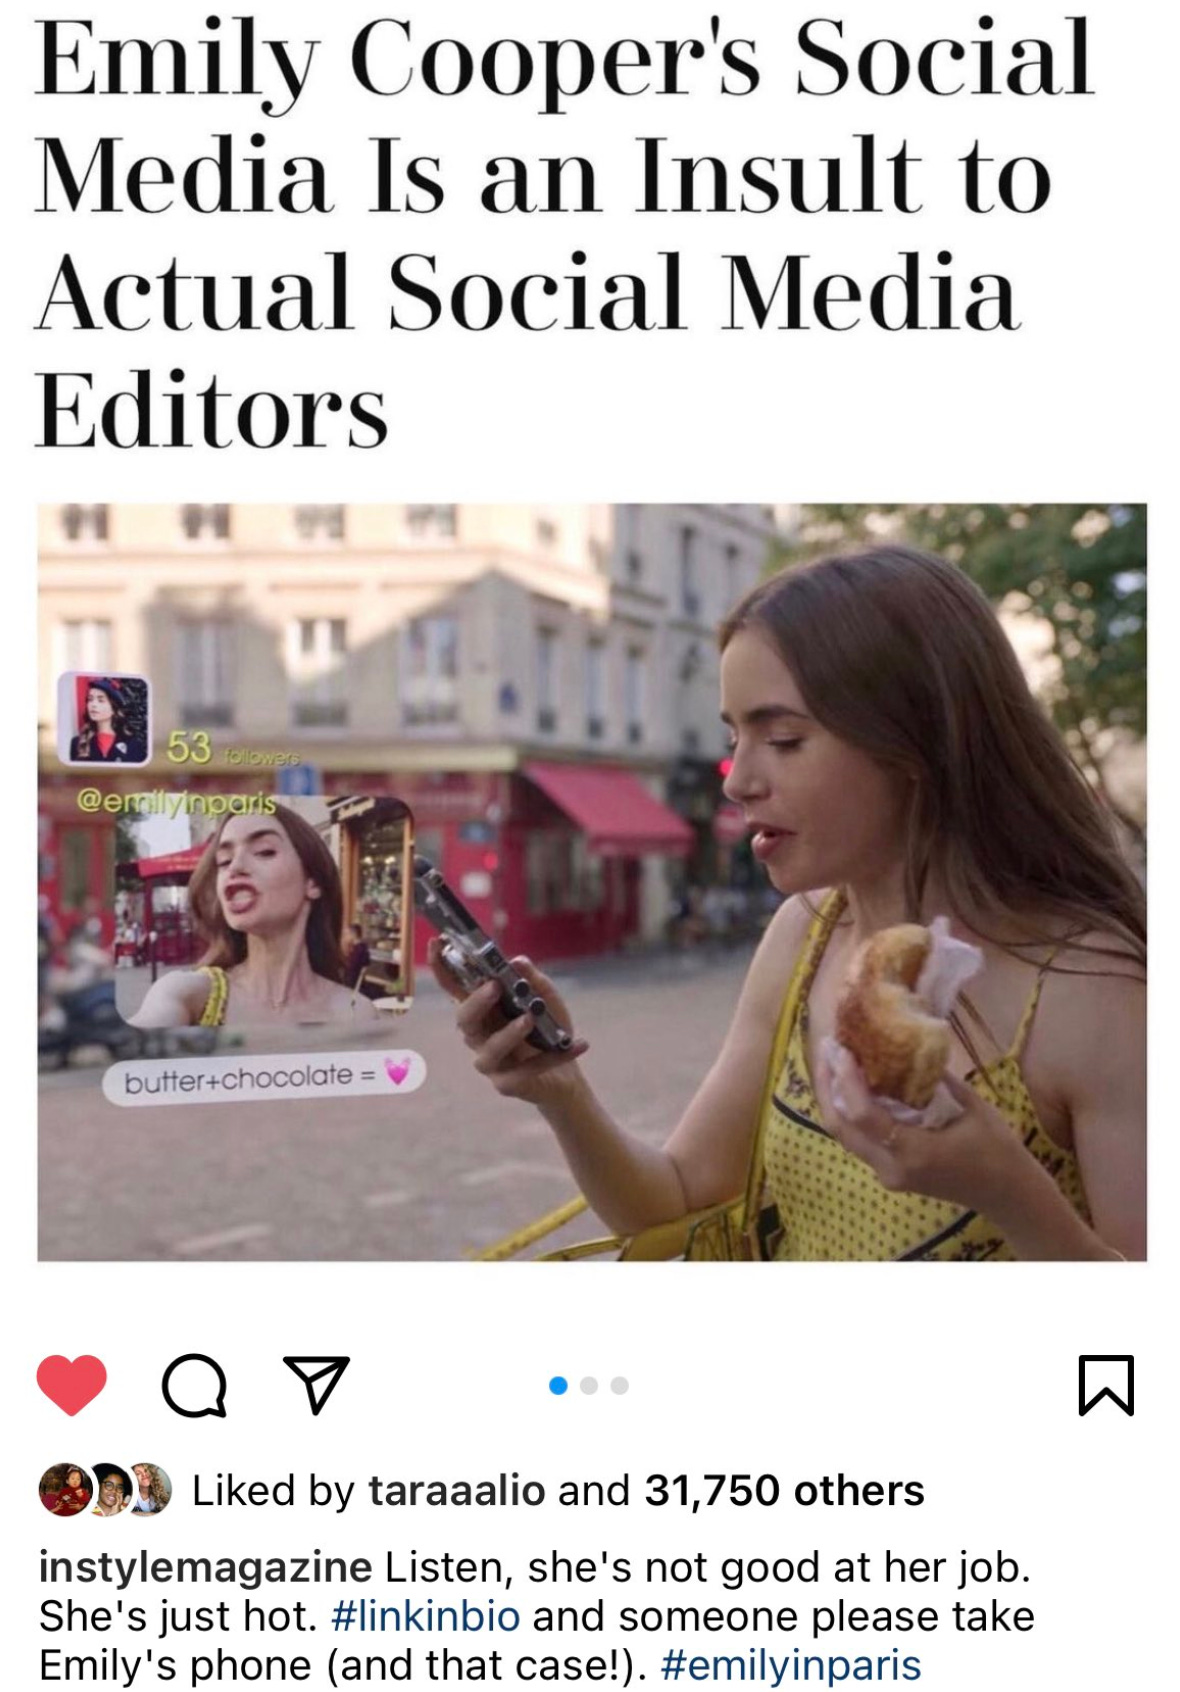 Post from In Style that says "Emily Cooper's Social Media Is an insult to Actual Social Media Editors" the caption says "Listen, she's not good at her job."